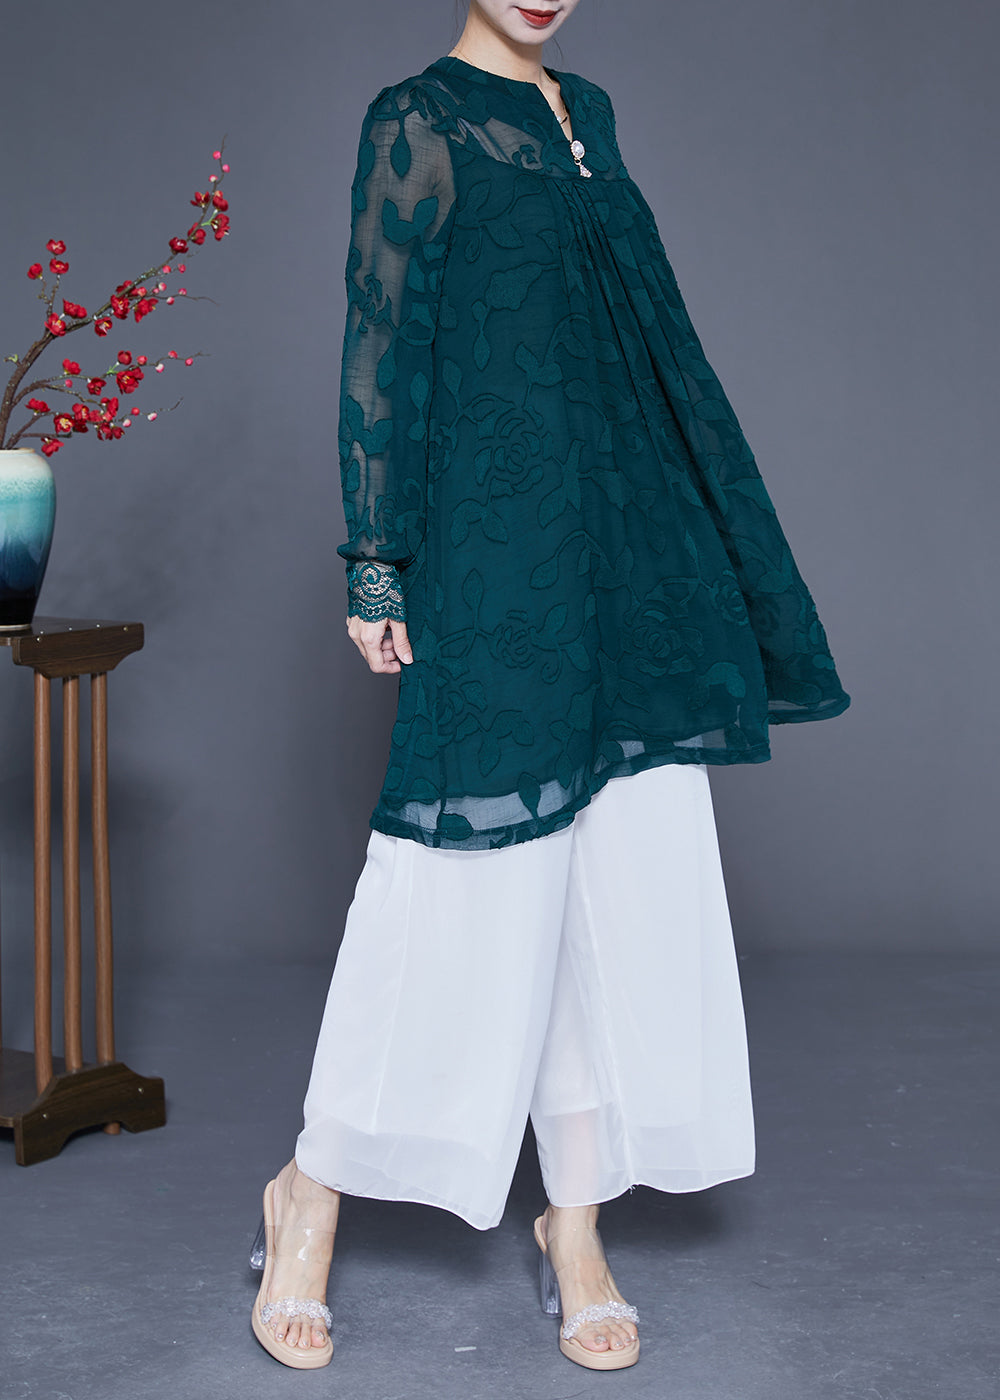 Casual Peacock Green Jacquard Hollow Out Tulle Dress Long Sleeve LY2879